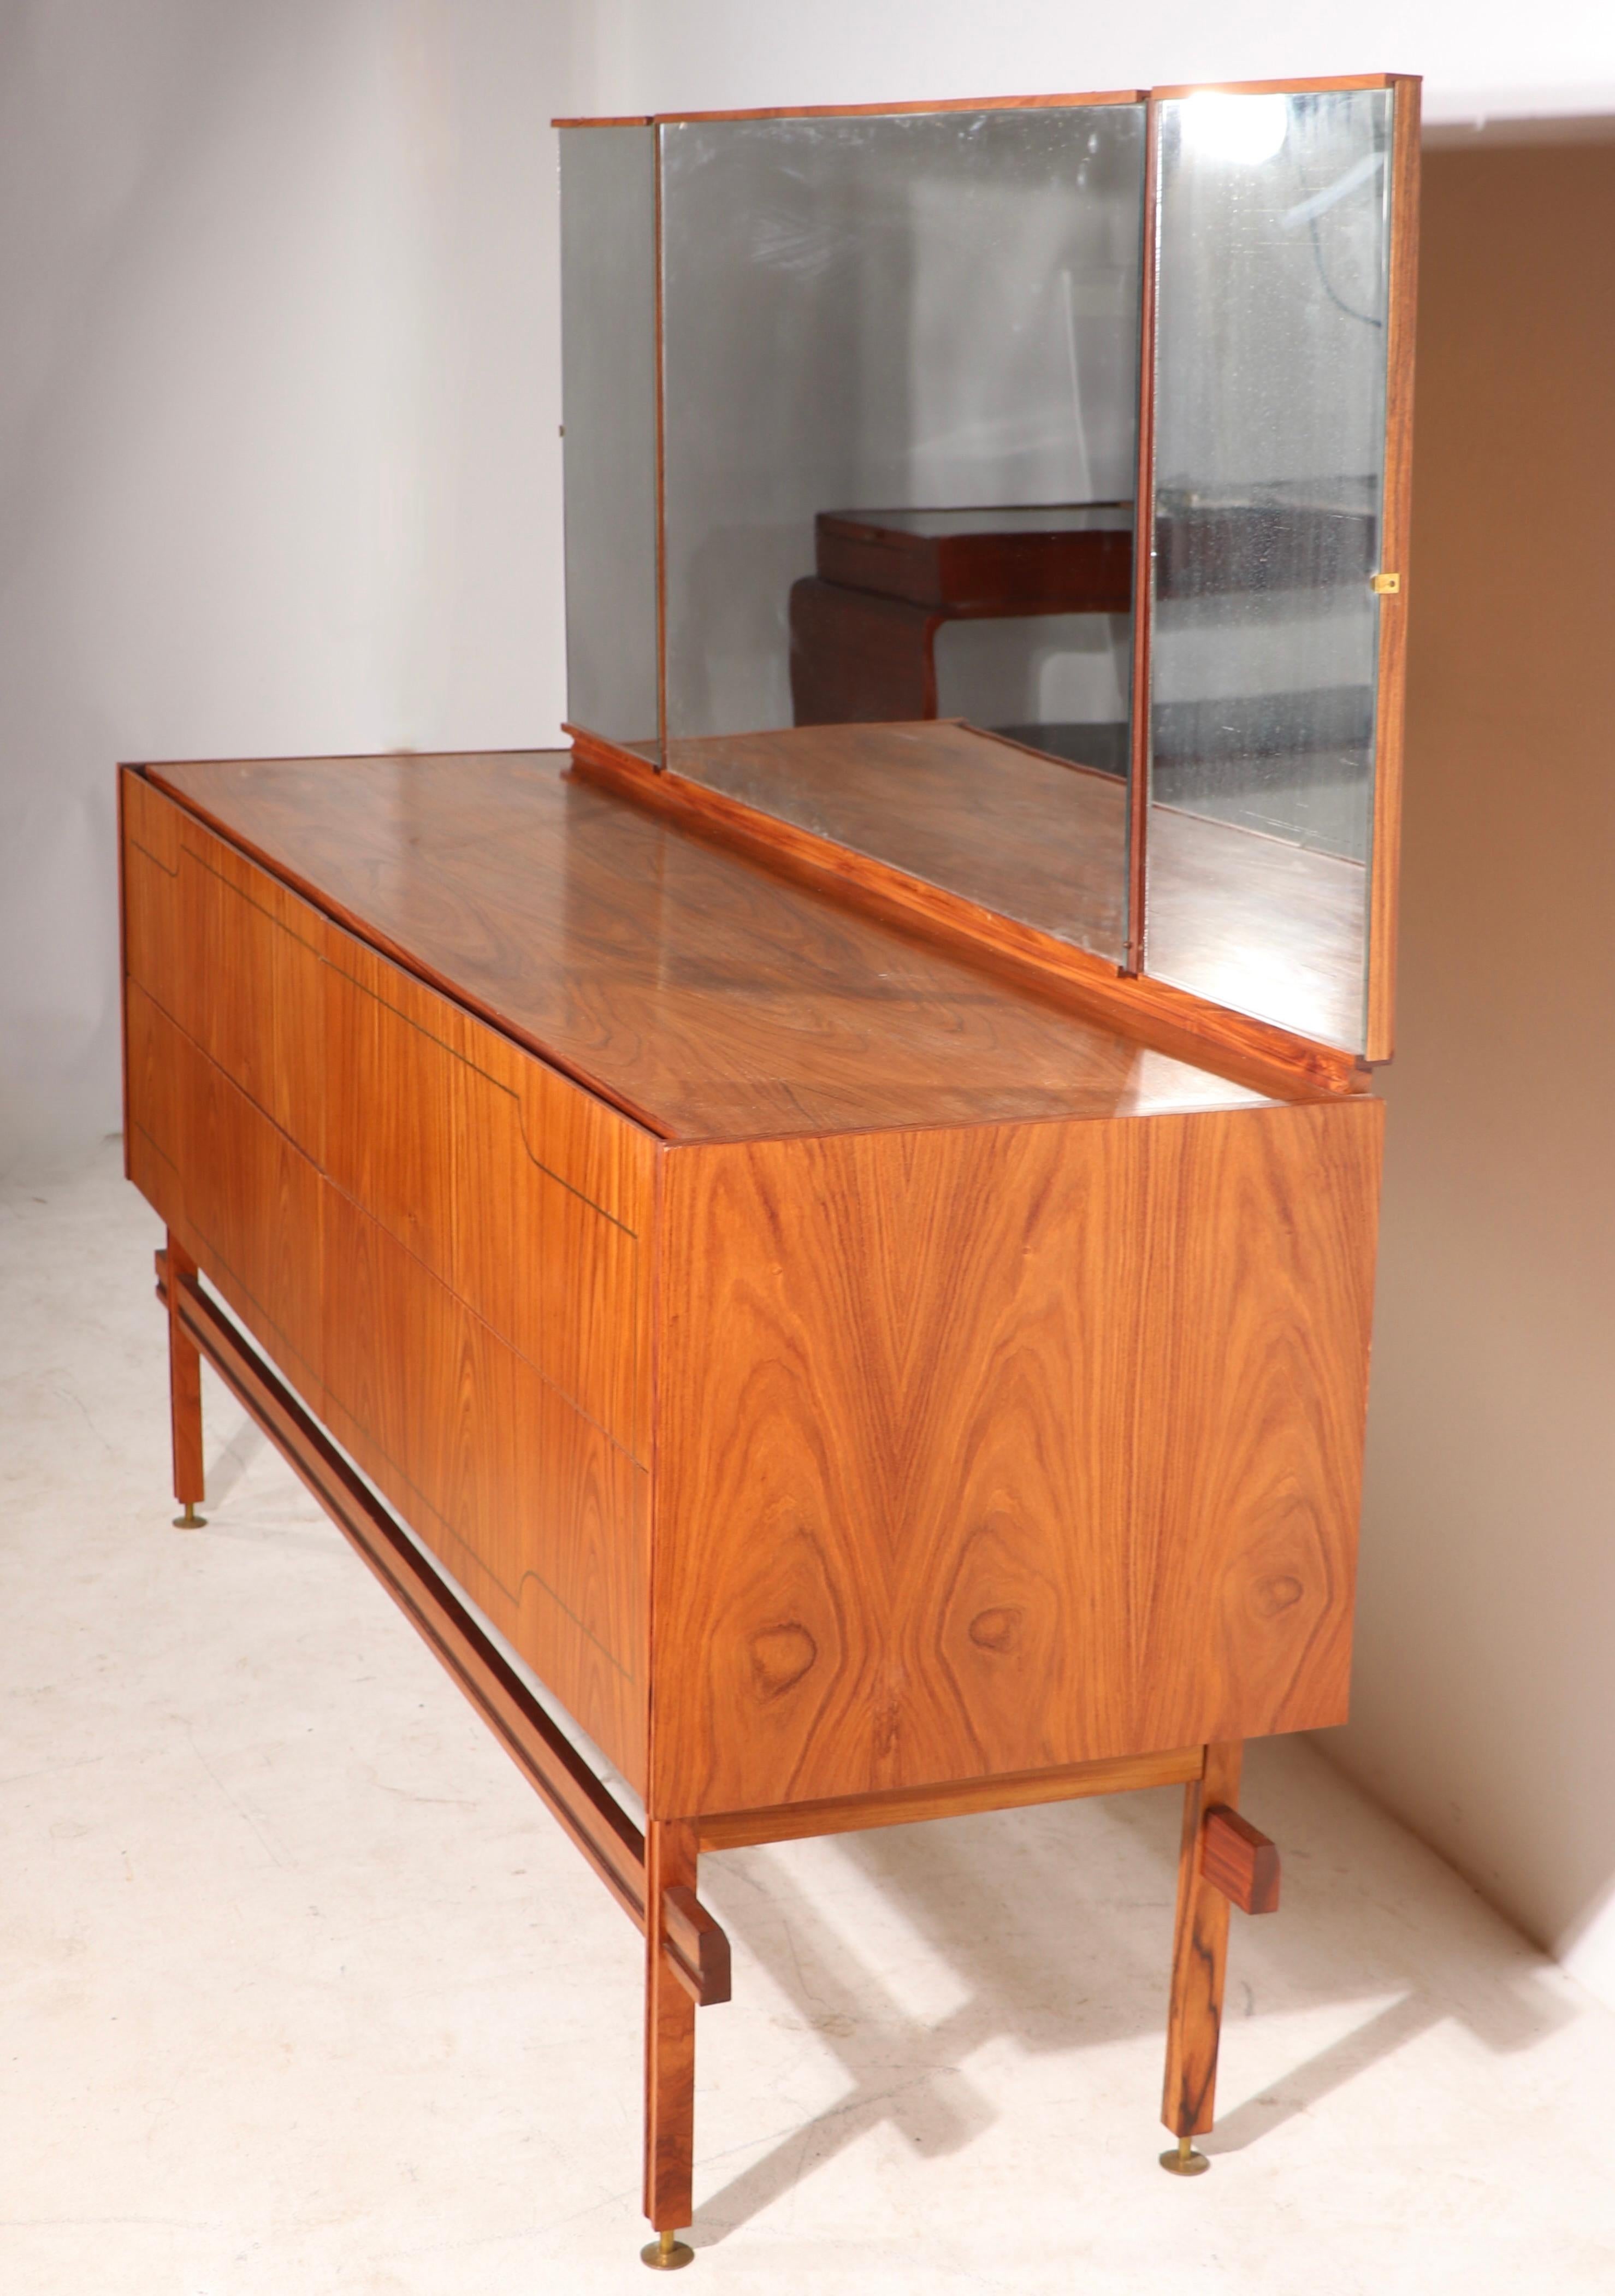 Spectacular Mid Century credenza, made in Brazil - designed by Carlo Hauner and Martin Eisler.
 This example is in very good, original condition, clean and ready to use. The case has vibrant Jakarta veneer, with pencil brass trim. The lower case